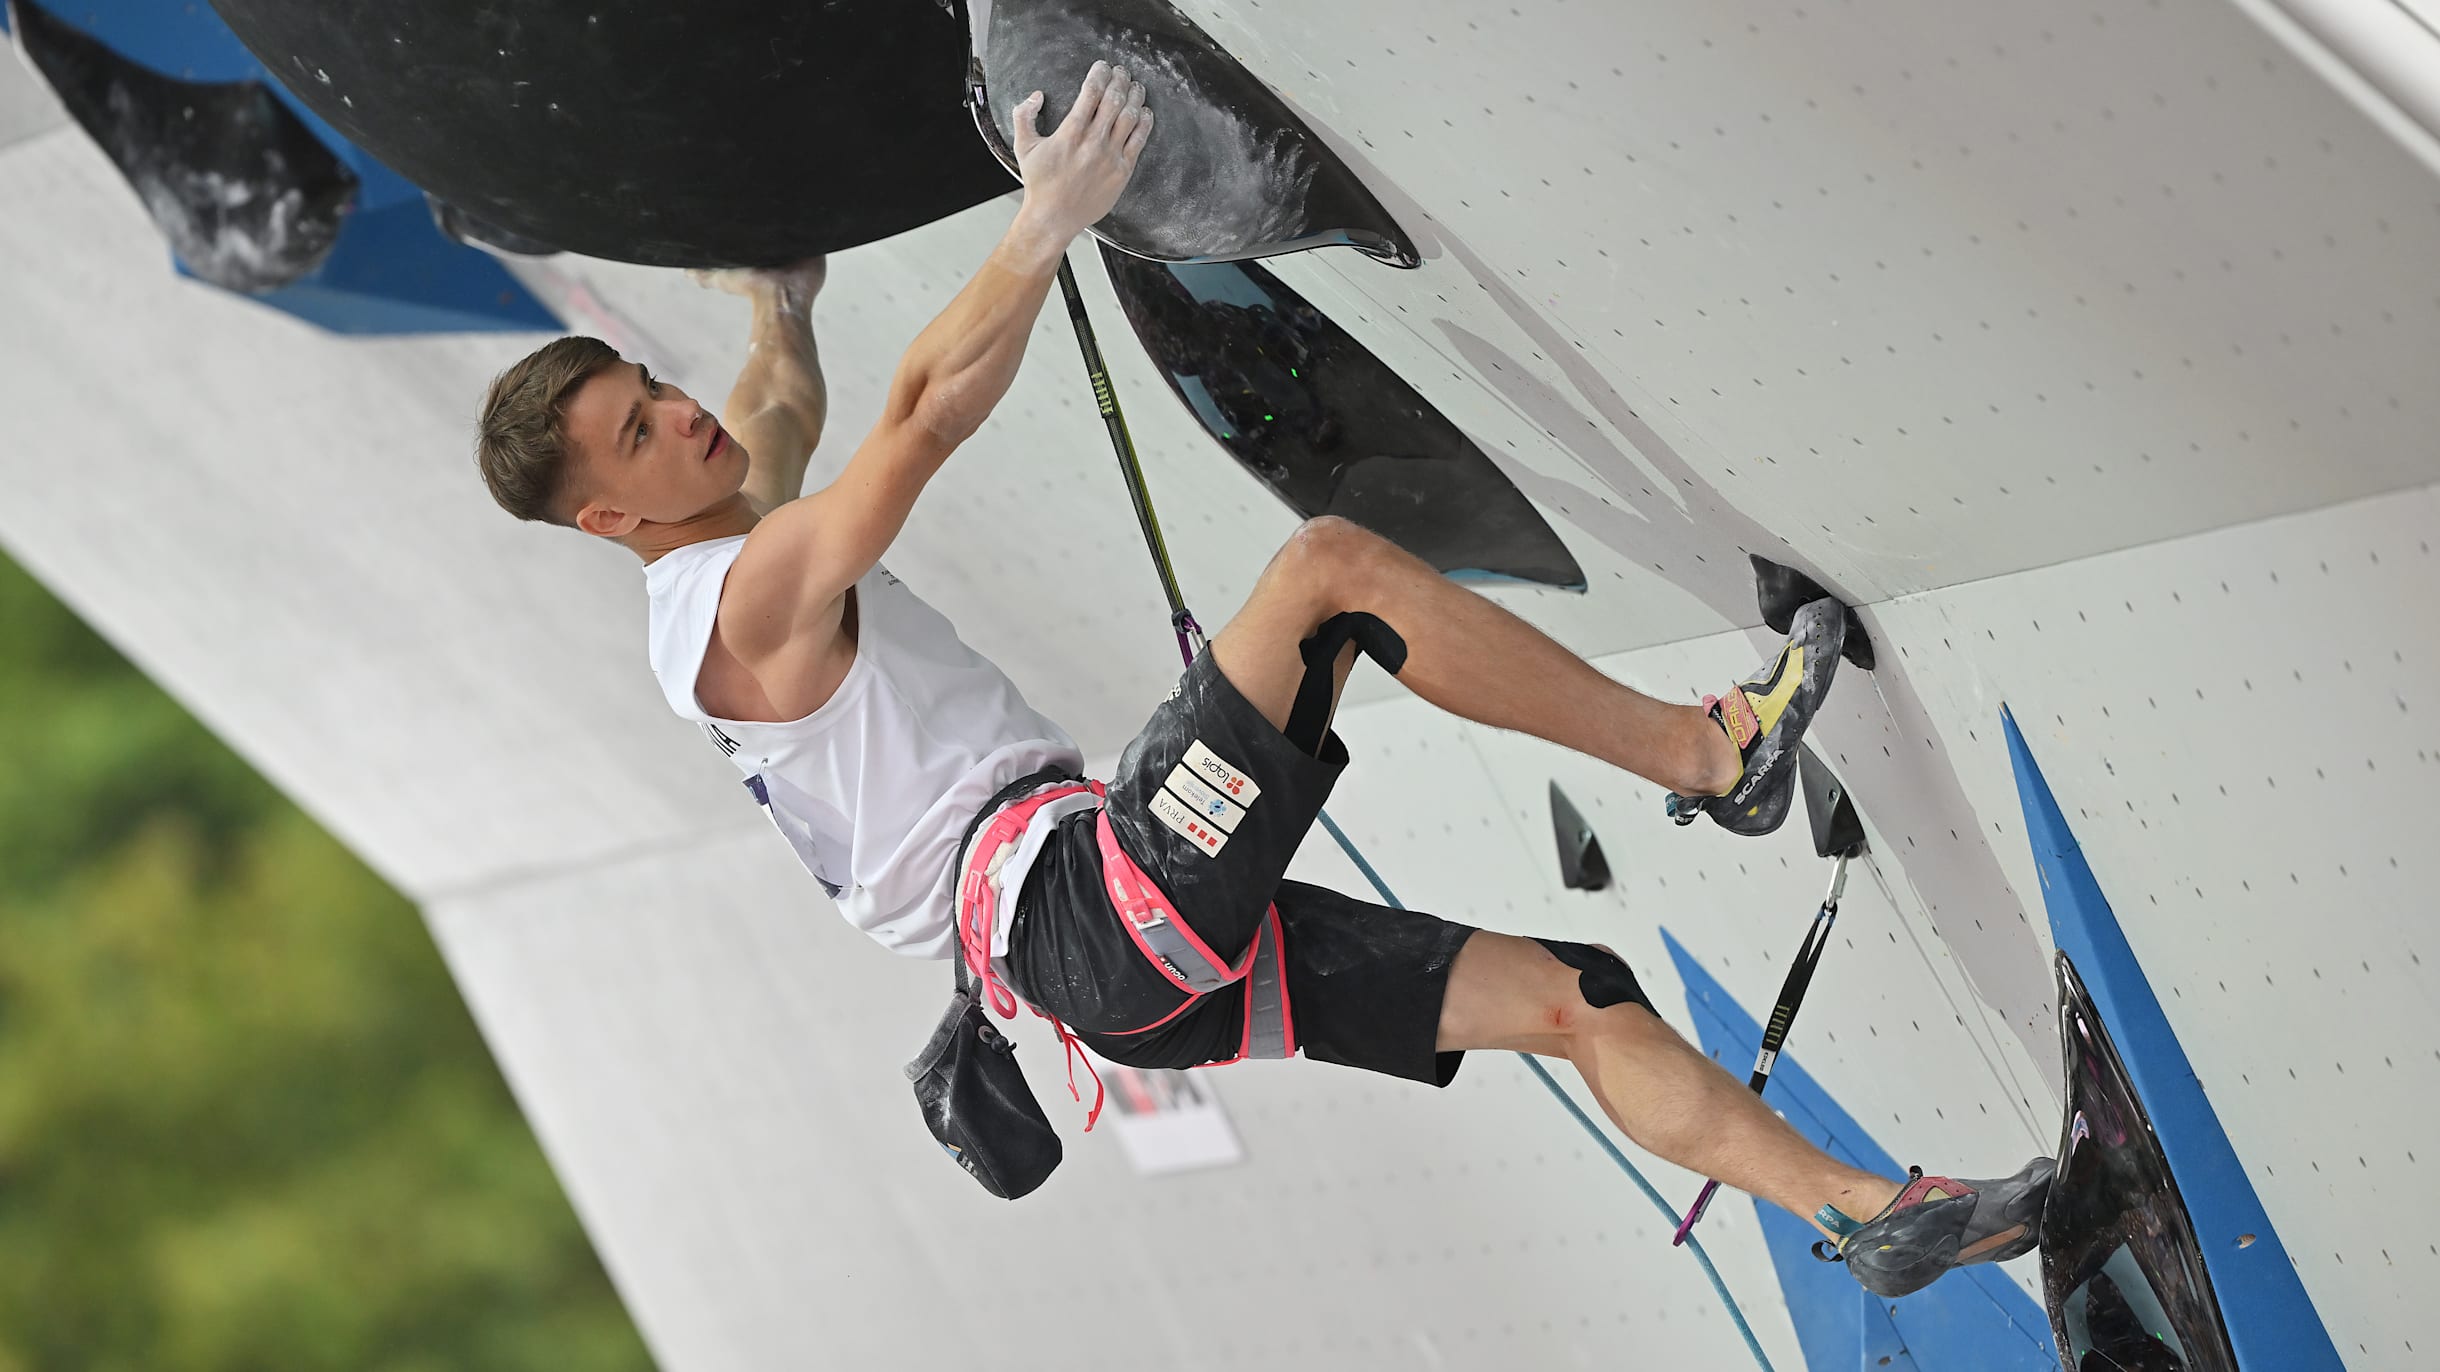 Rock climbing is a new Olympic sport. Here's what to expect.